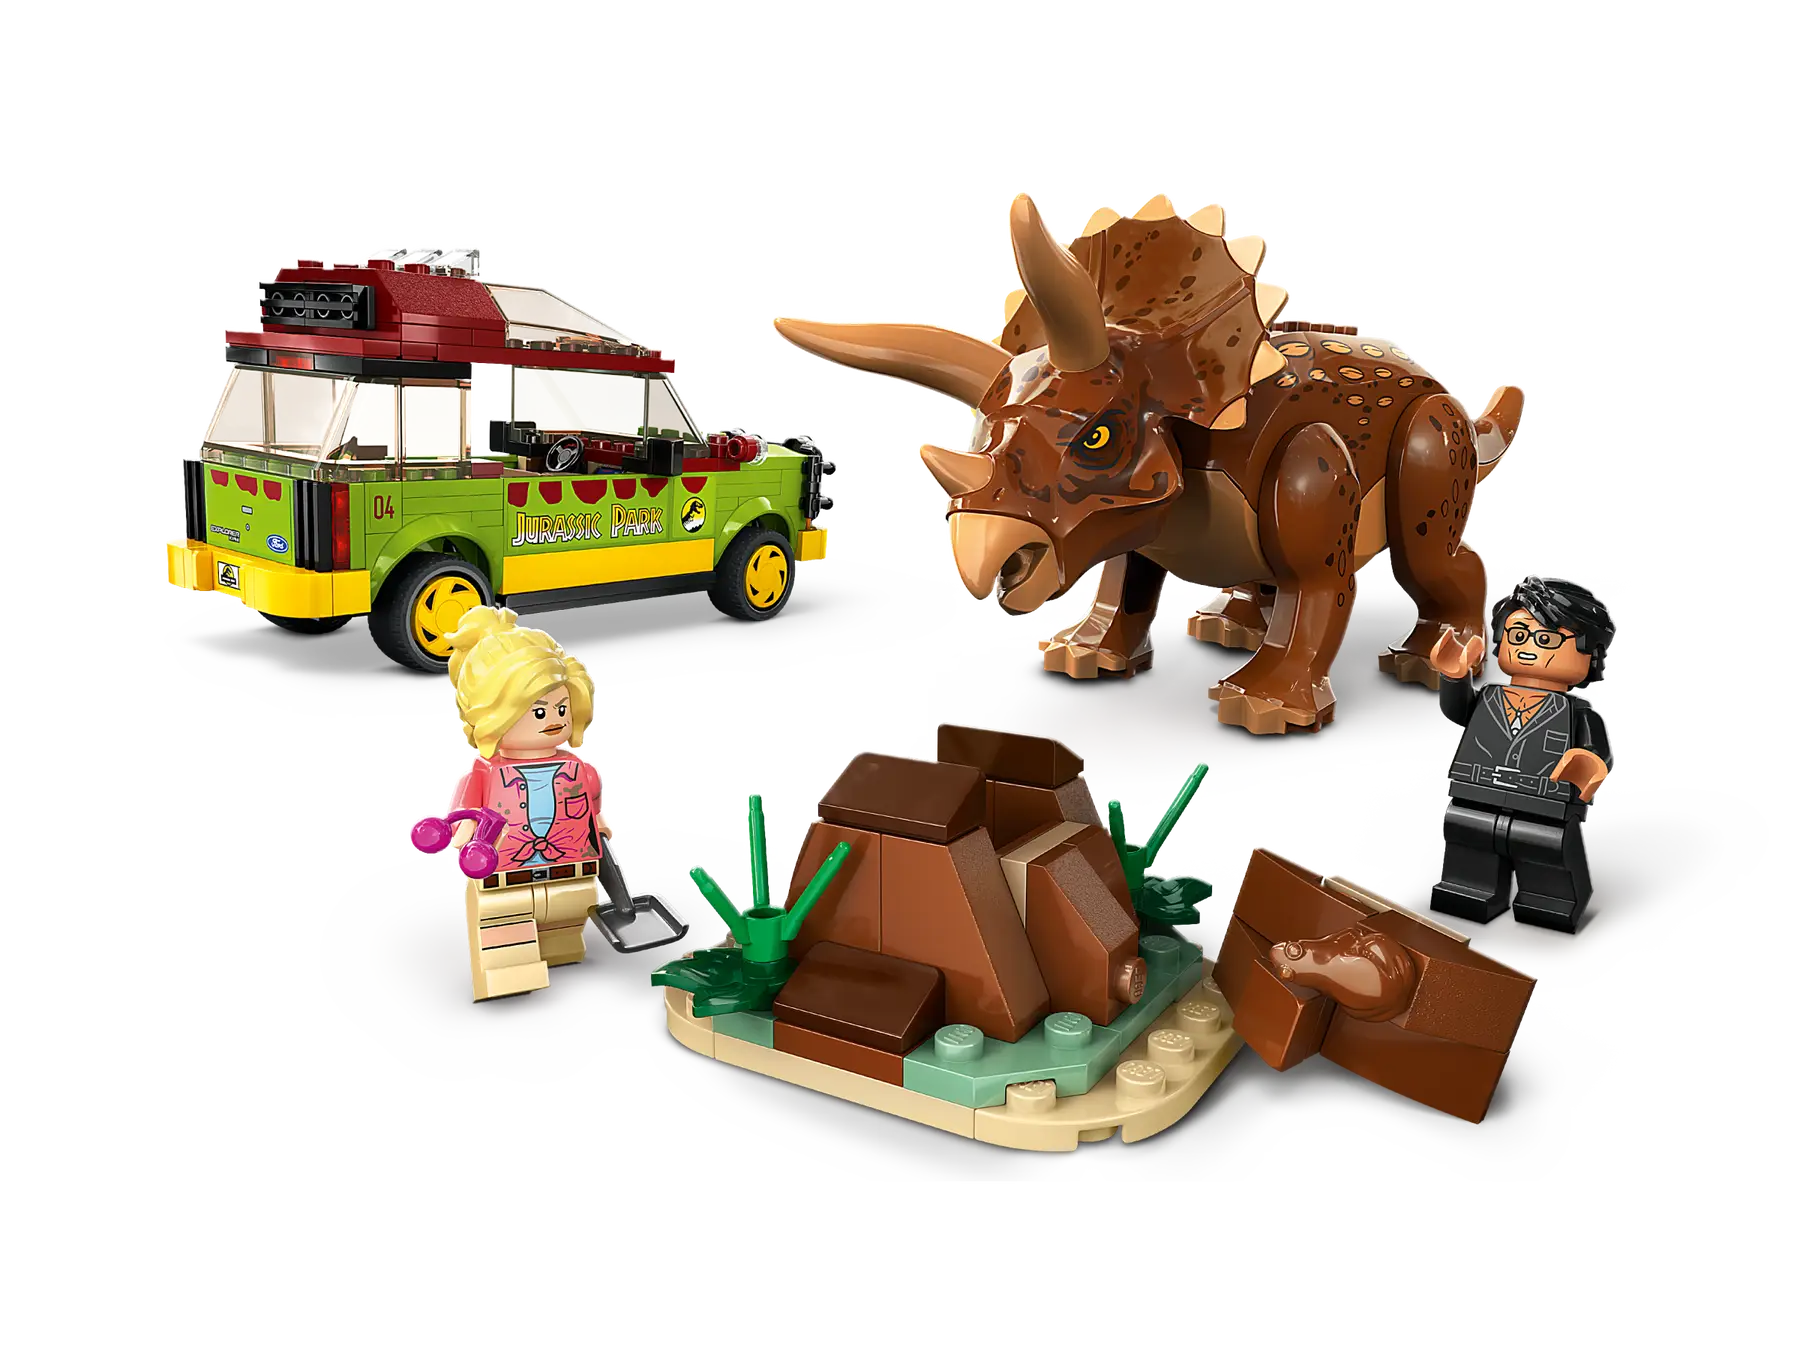 Lego Jurassic World - Triceratops Research 76959